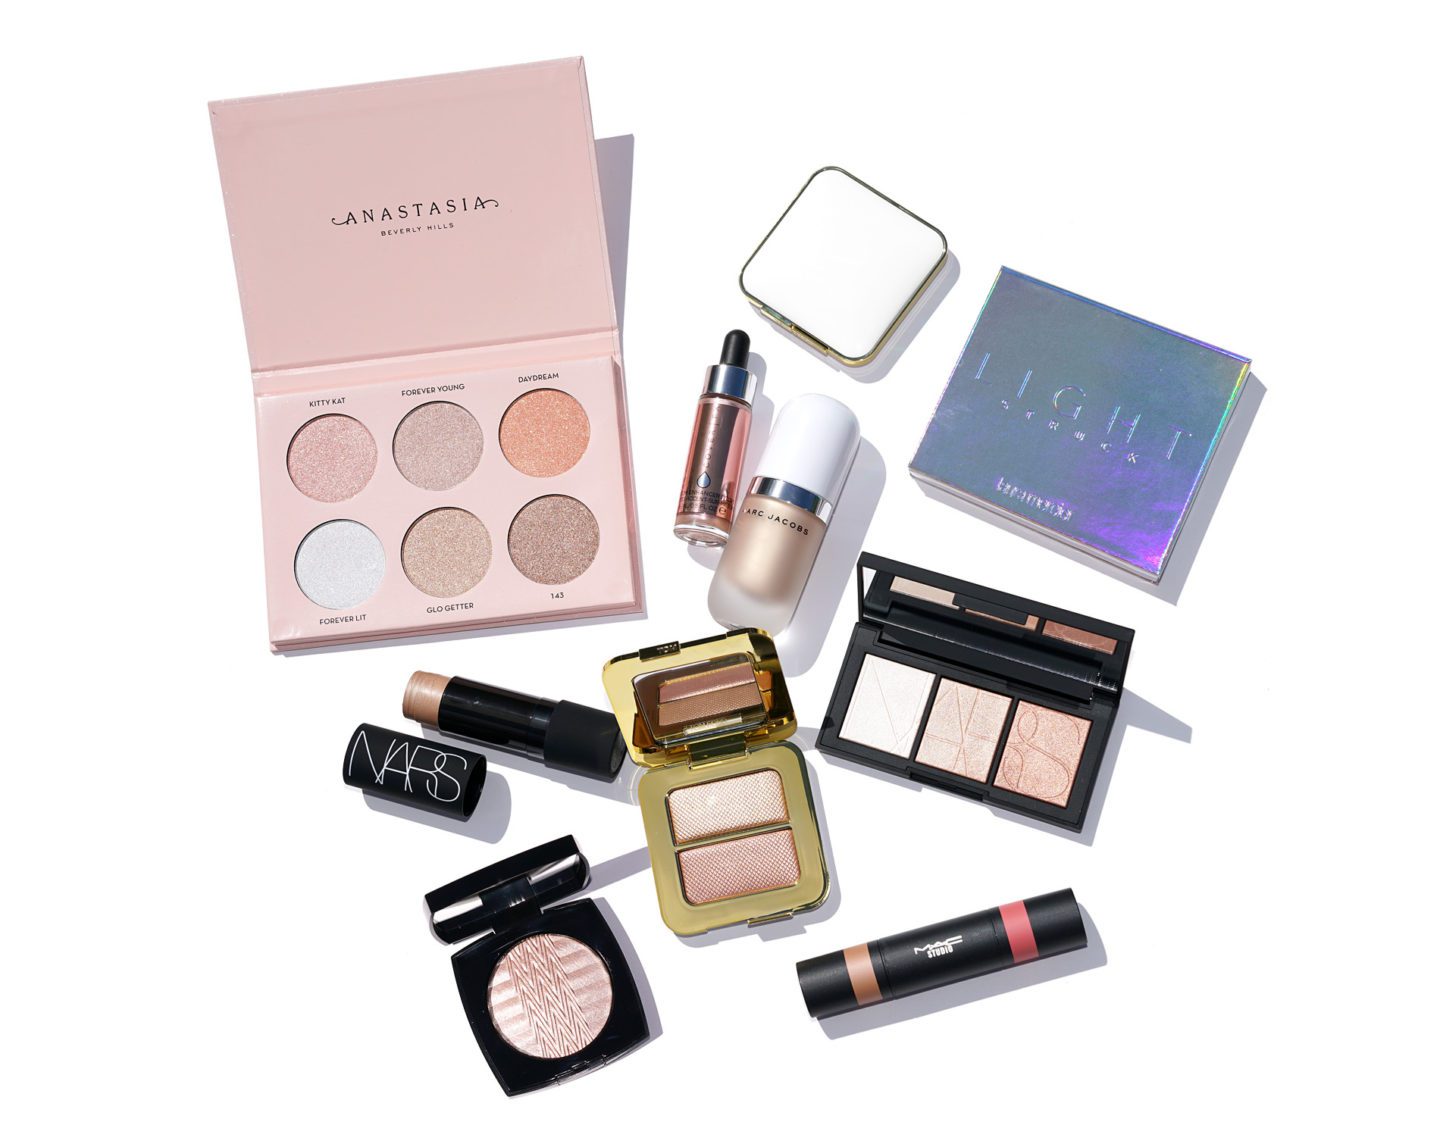 Highlighter Roundup | The Beauty Look Book